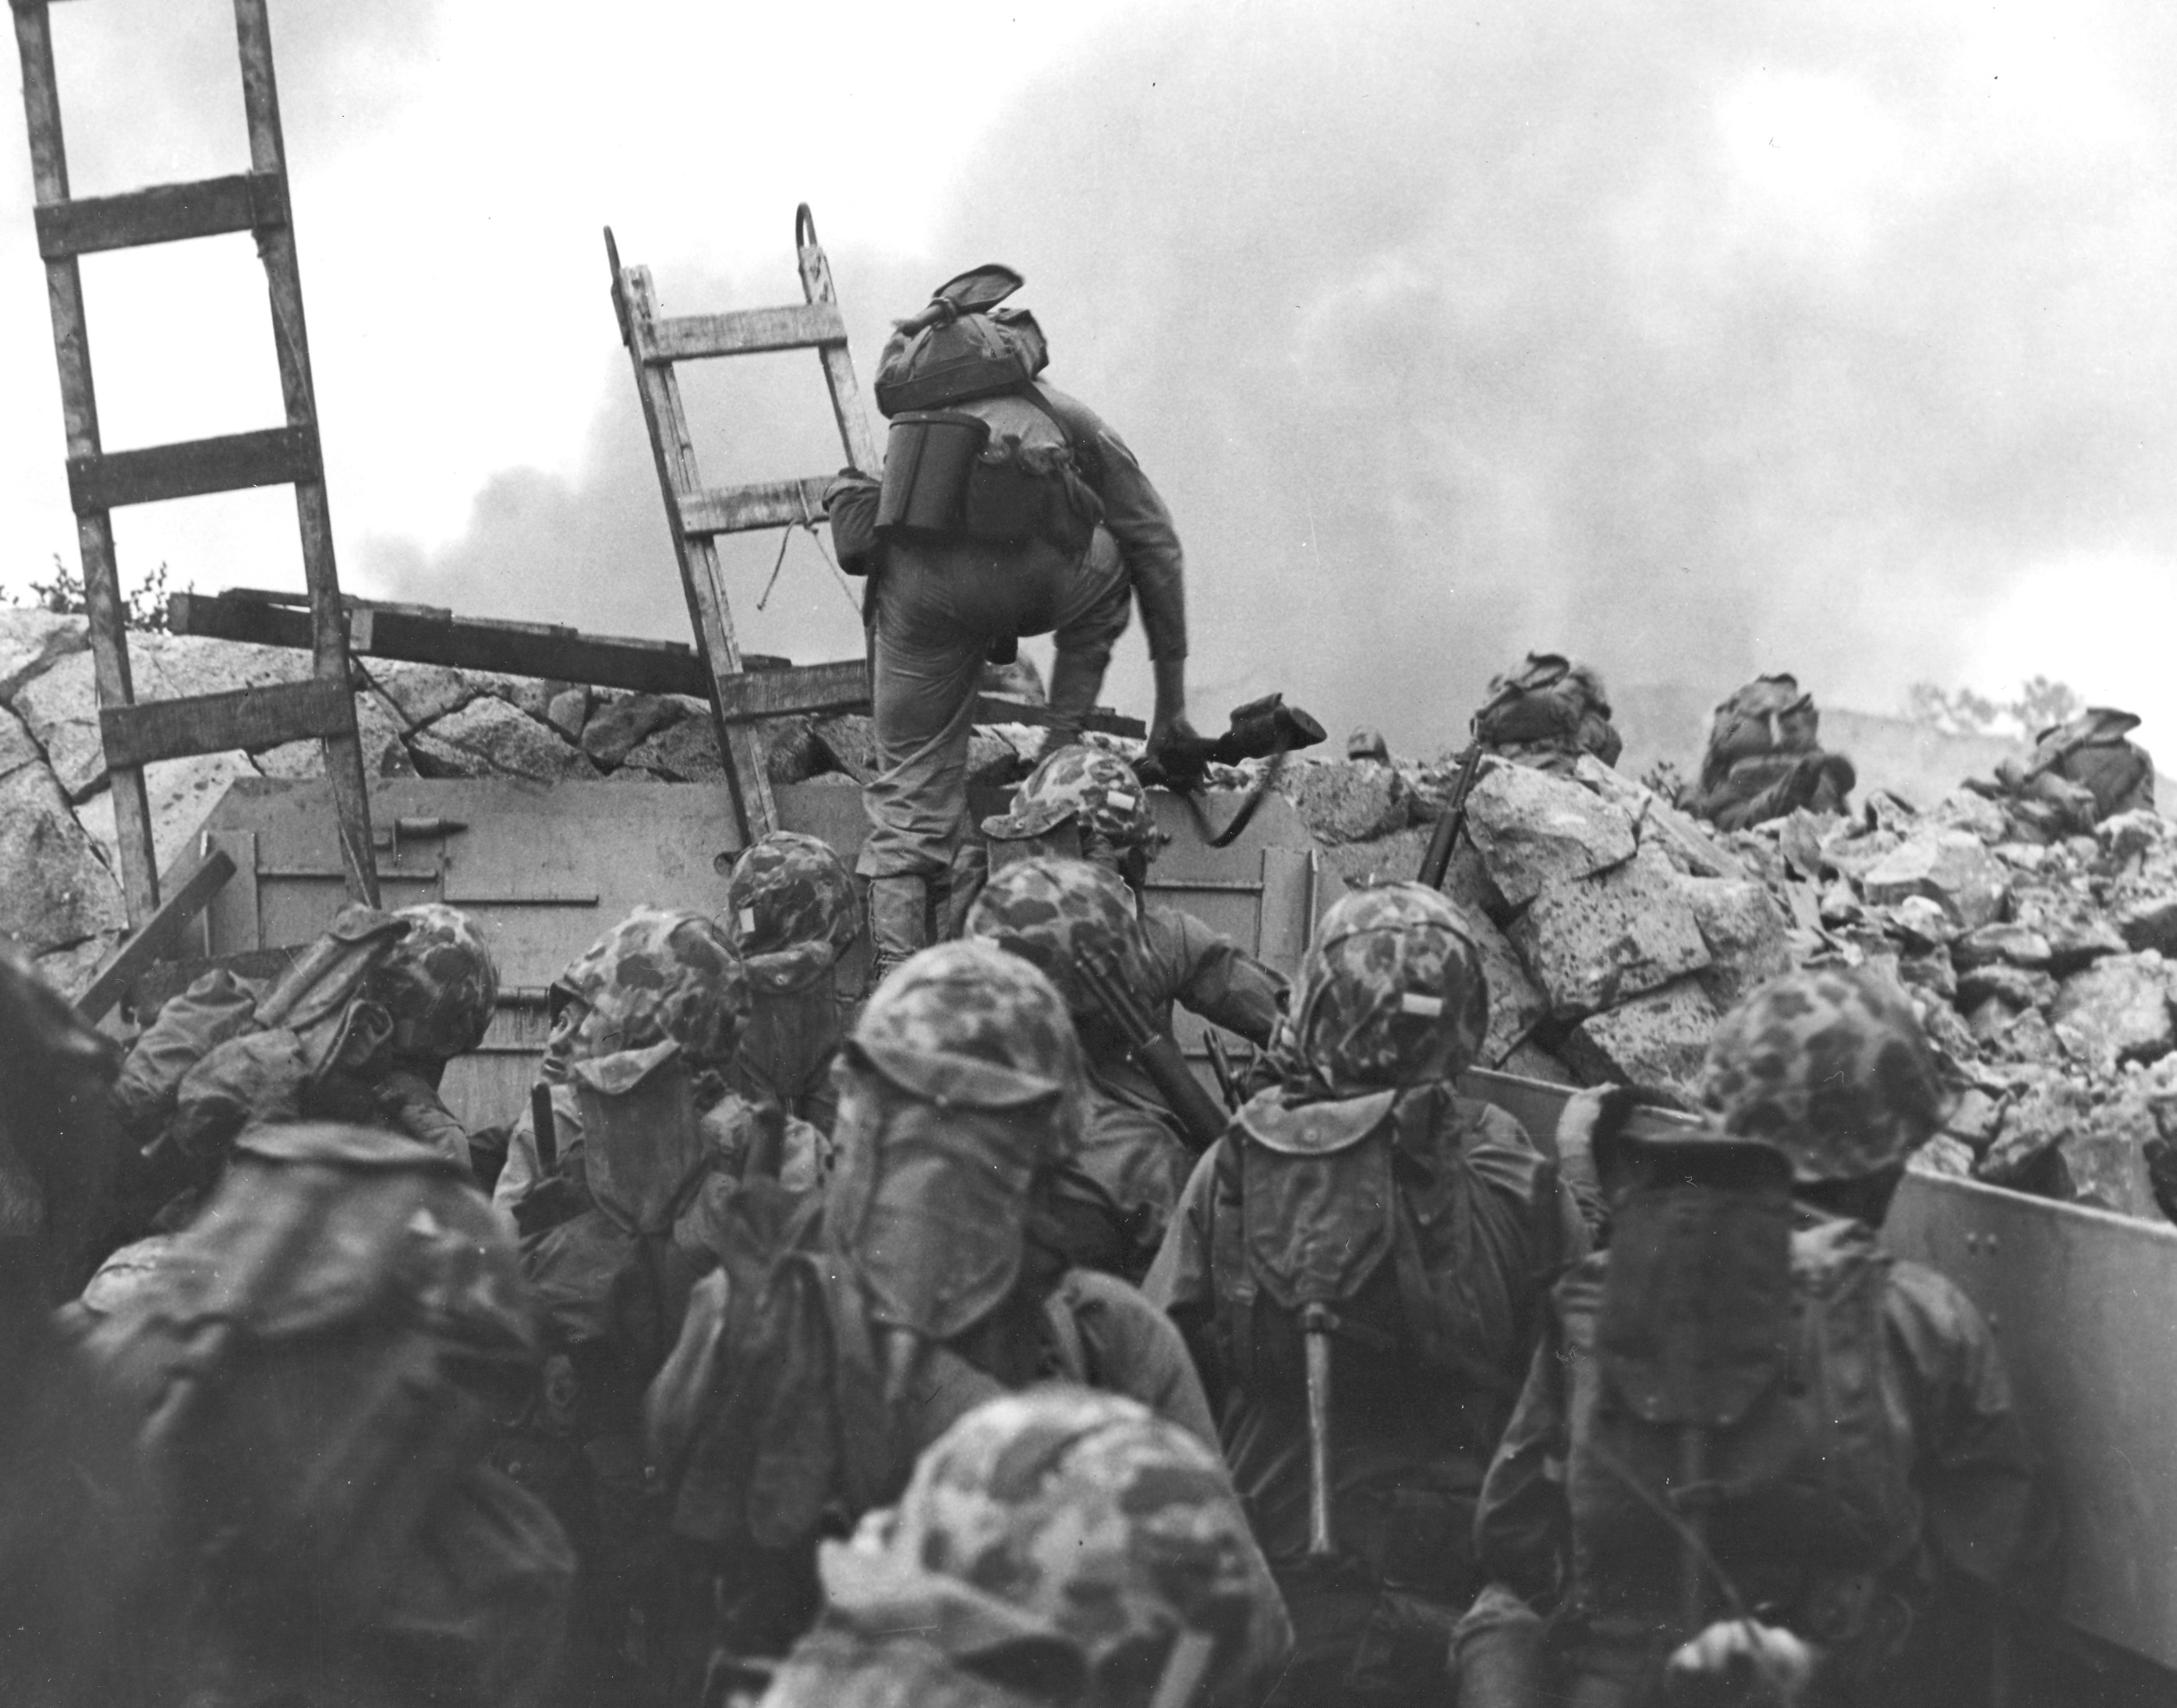 Leathernecks use scaling ladders to storm ashore at Inchon in an amphibious invasion, September 15, 1950